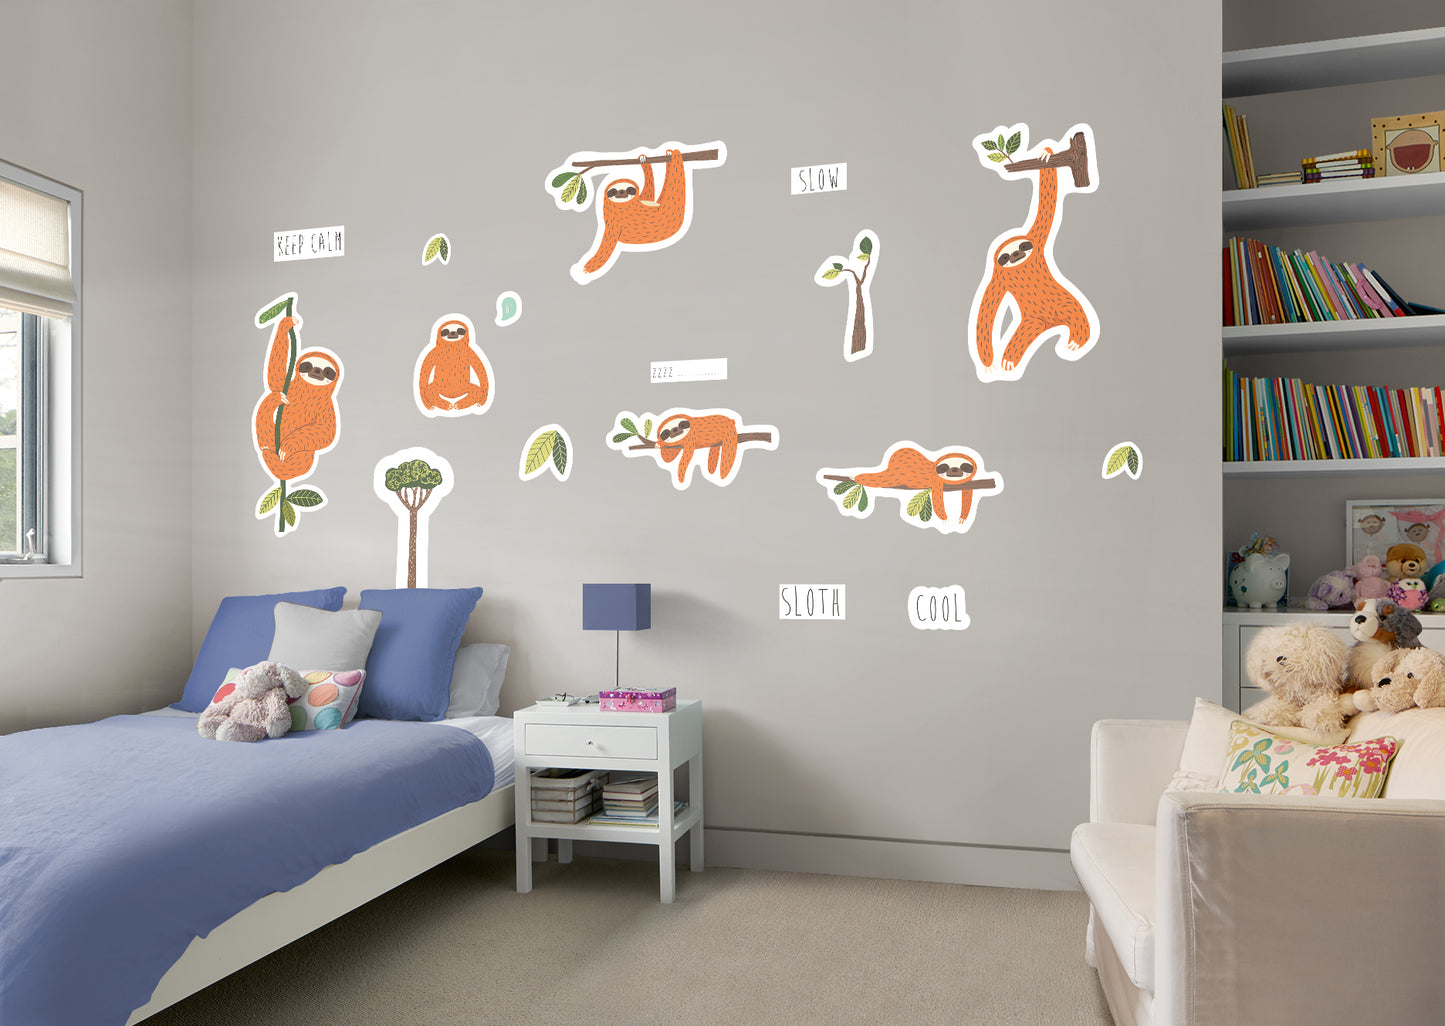 Jungle:  Keep Calm Collection        -   Removable Wall   Adhesive Decal